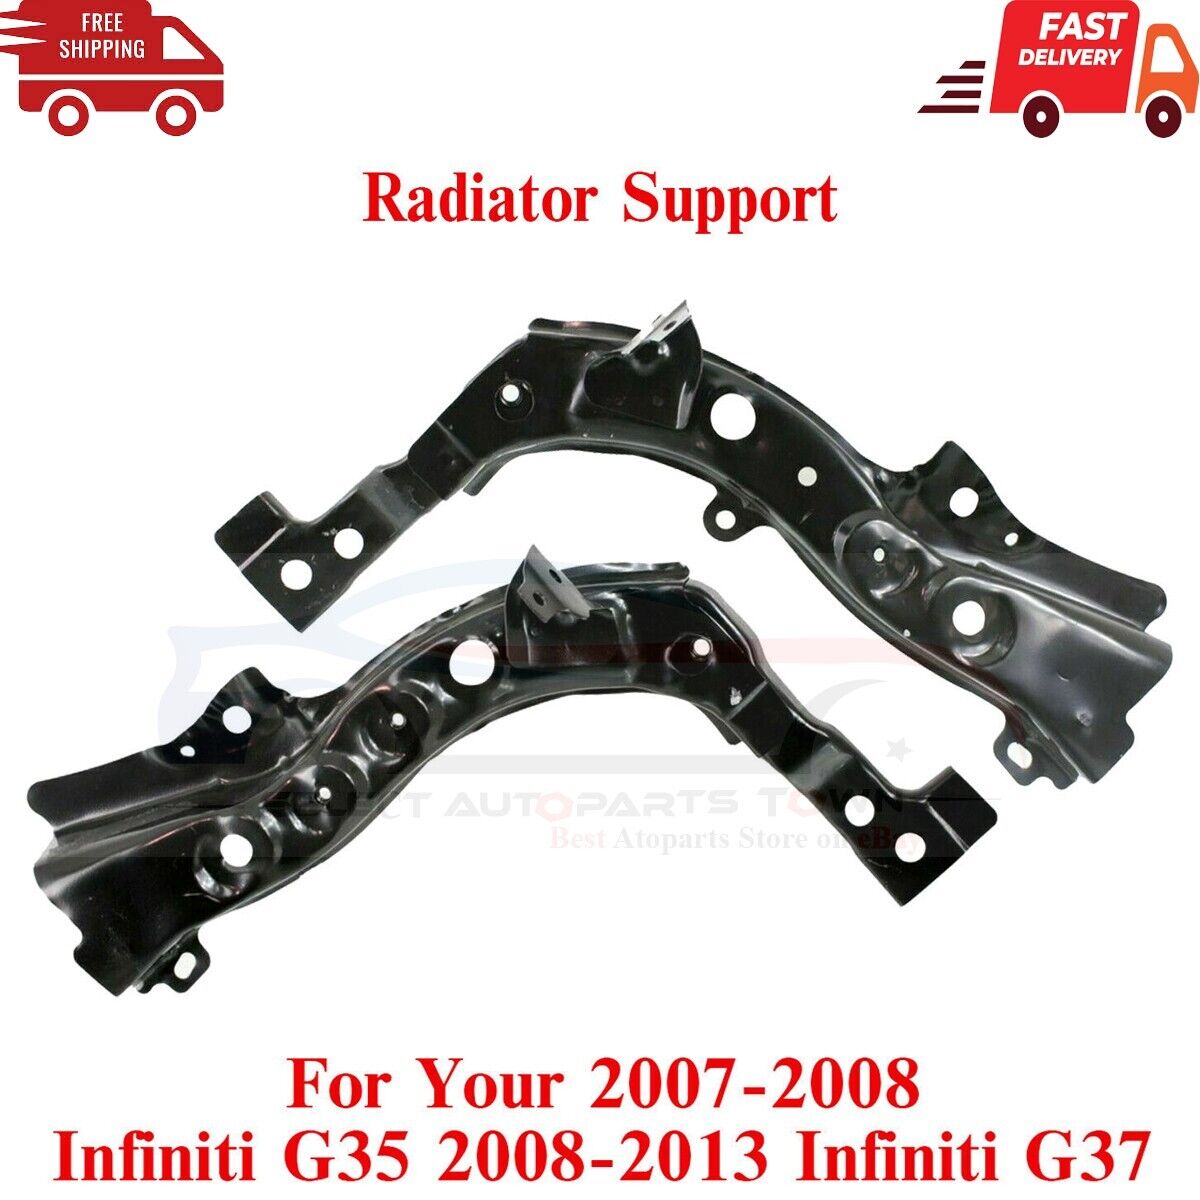 New Fits 07-08 Infiniti G35 08-13 G37 Front Radiator Support Steel Left & Right